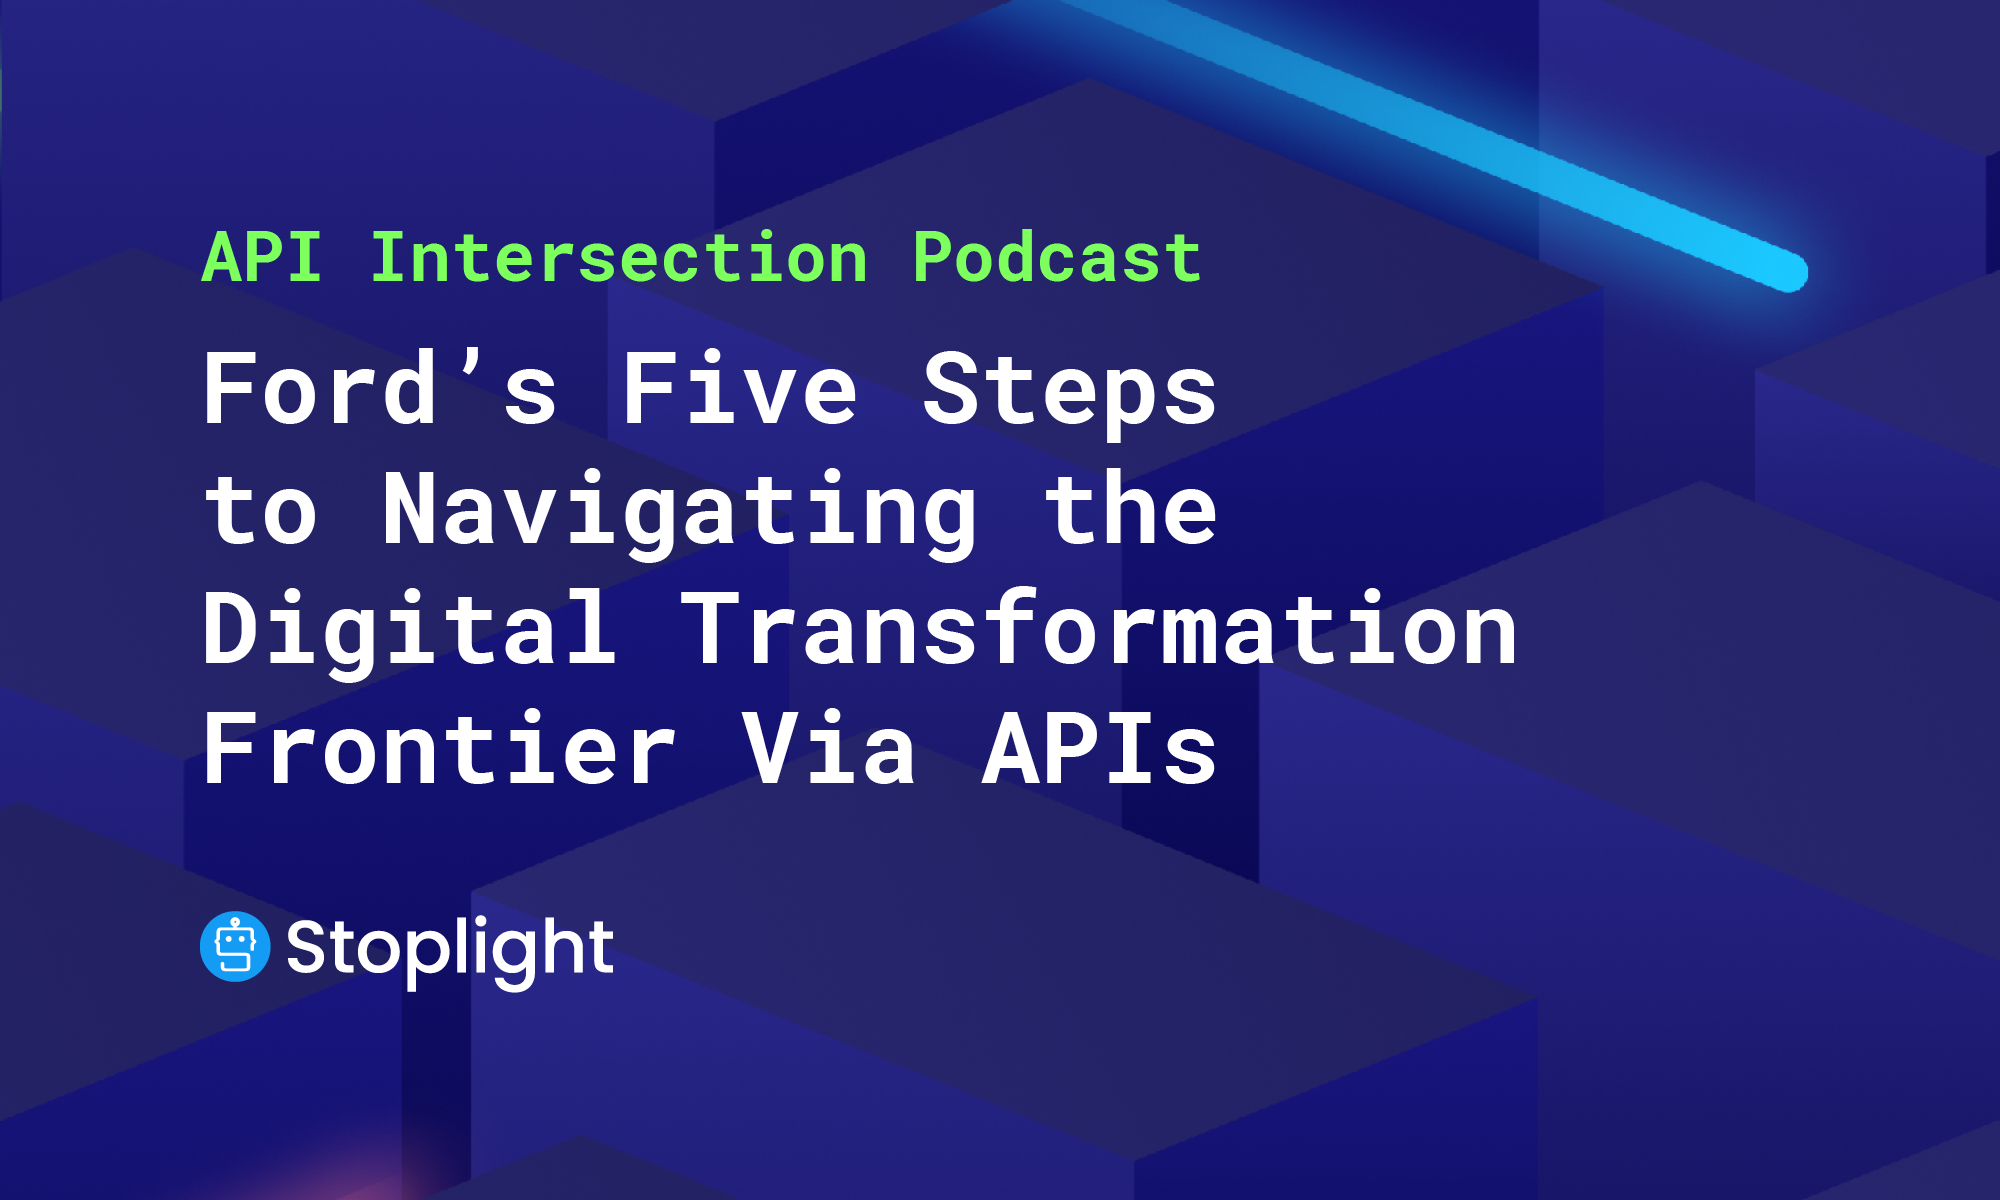 Ford’s 5 Steps to Navigating the Digital Transformation Frontier via APIs